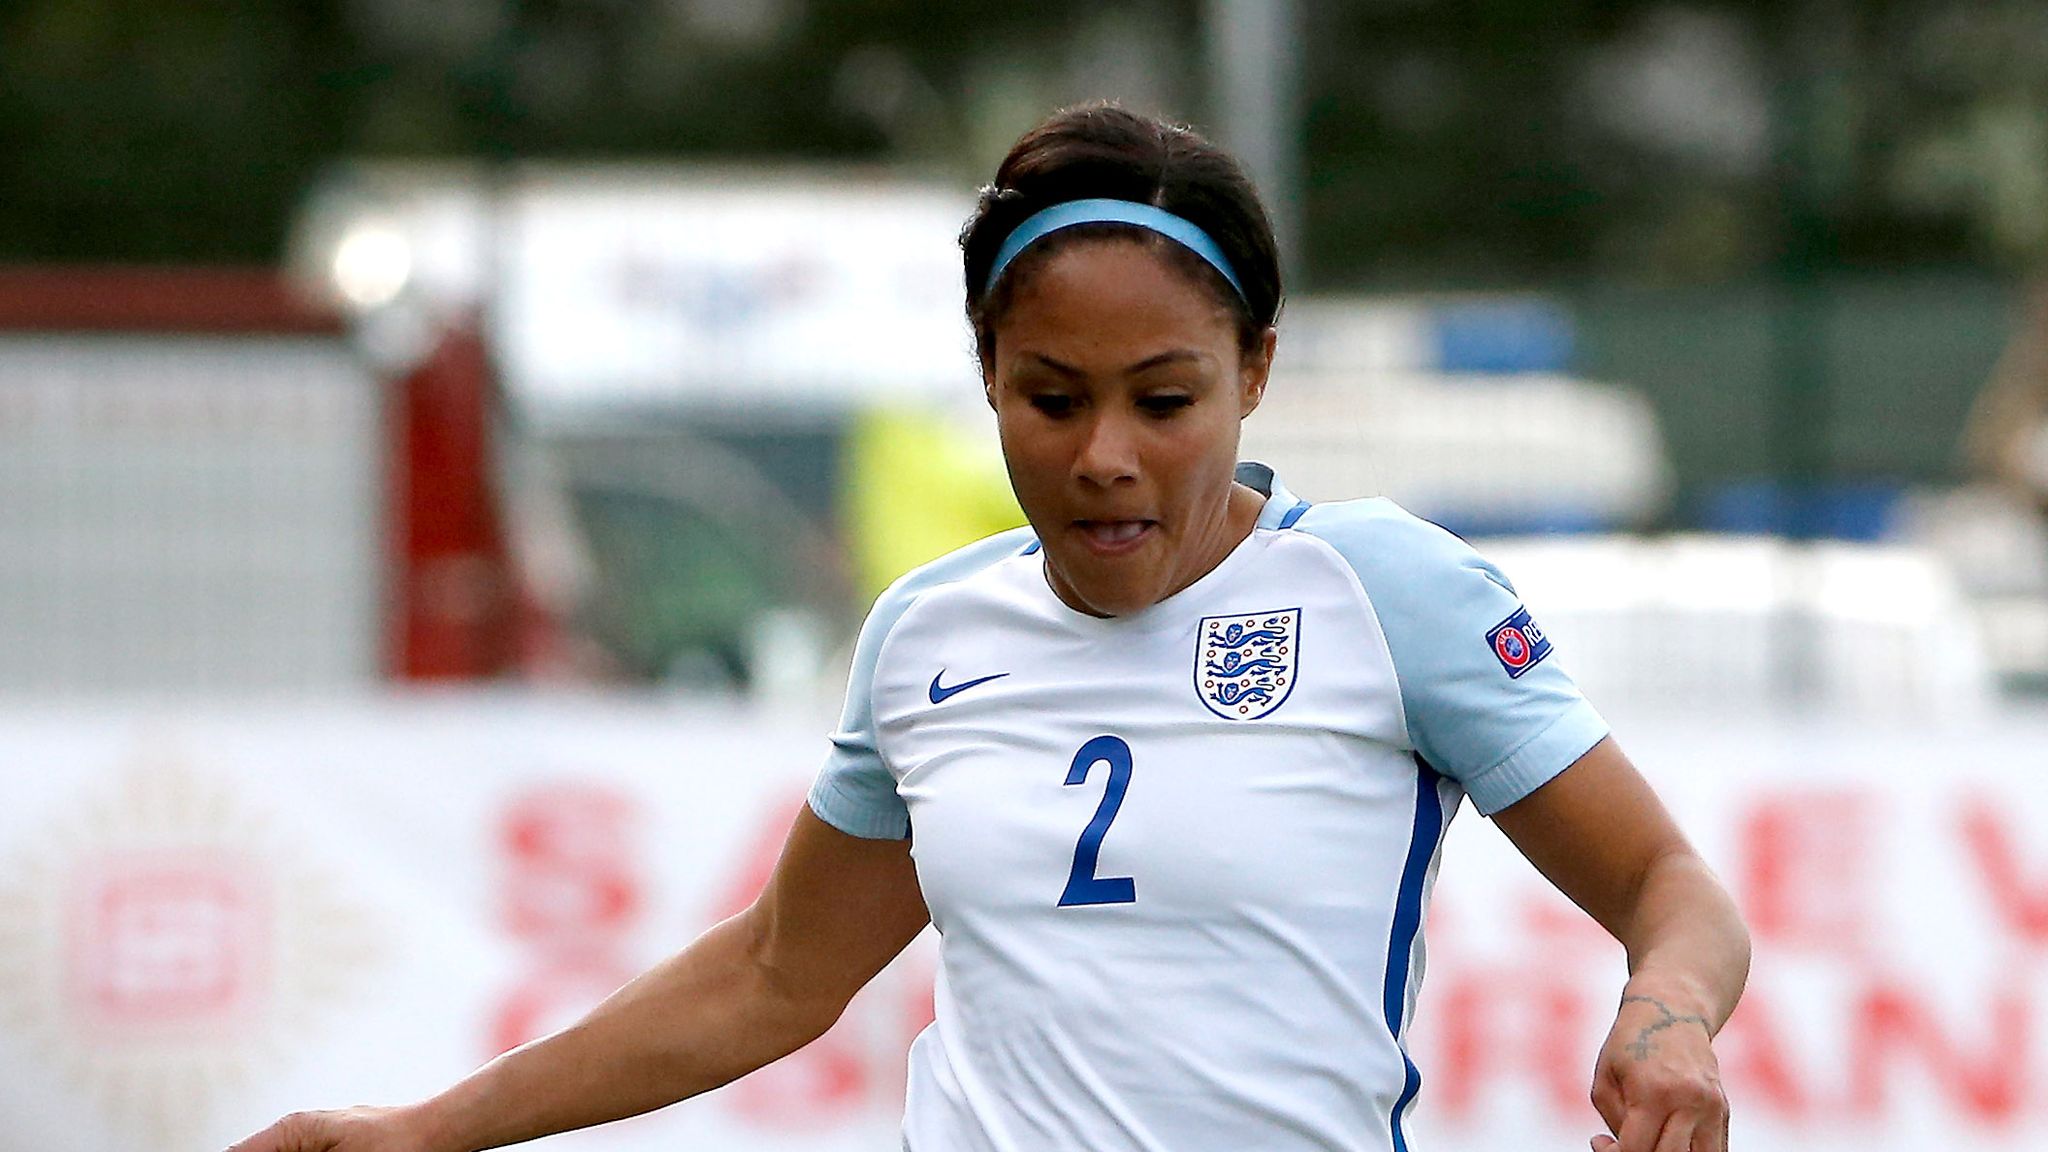 Alex Scott says therapy helped her overcome social media abuse ...